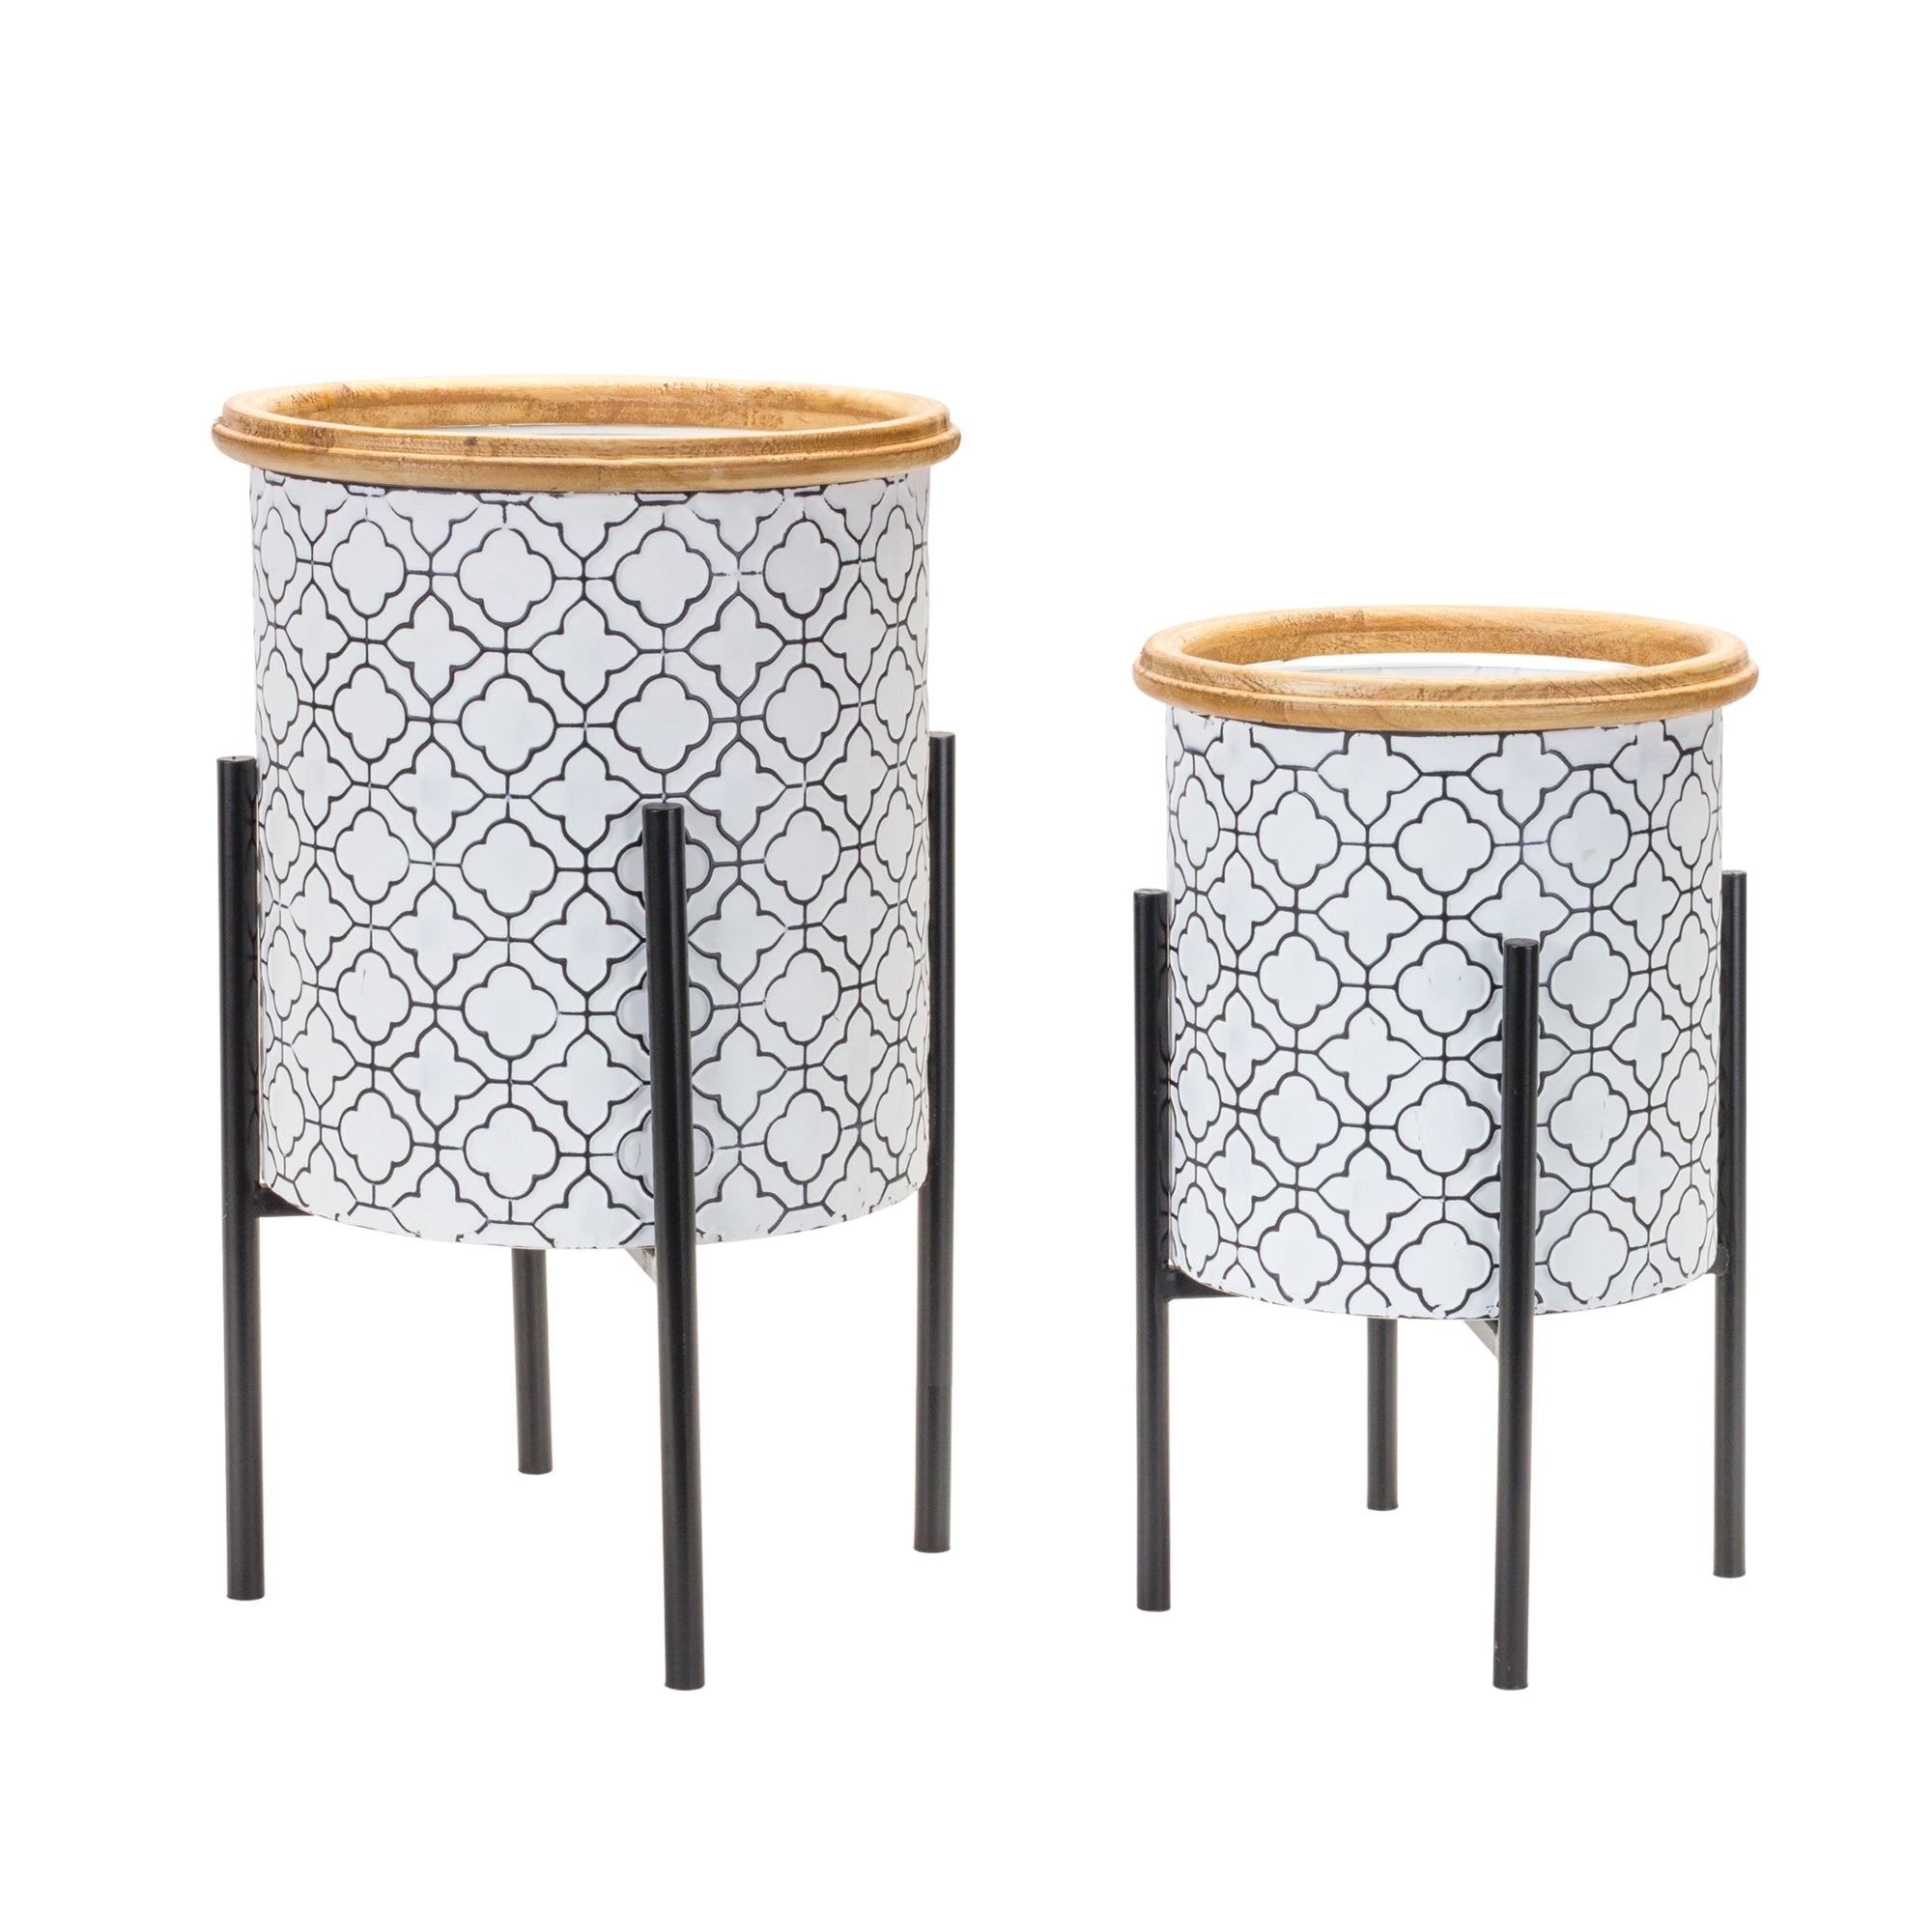 Ornate Metal Planter with Stand (Set of 2)